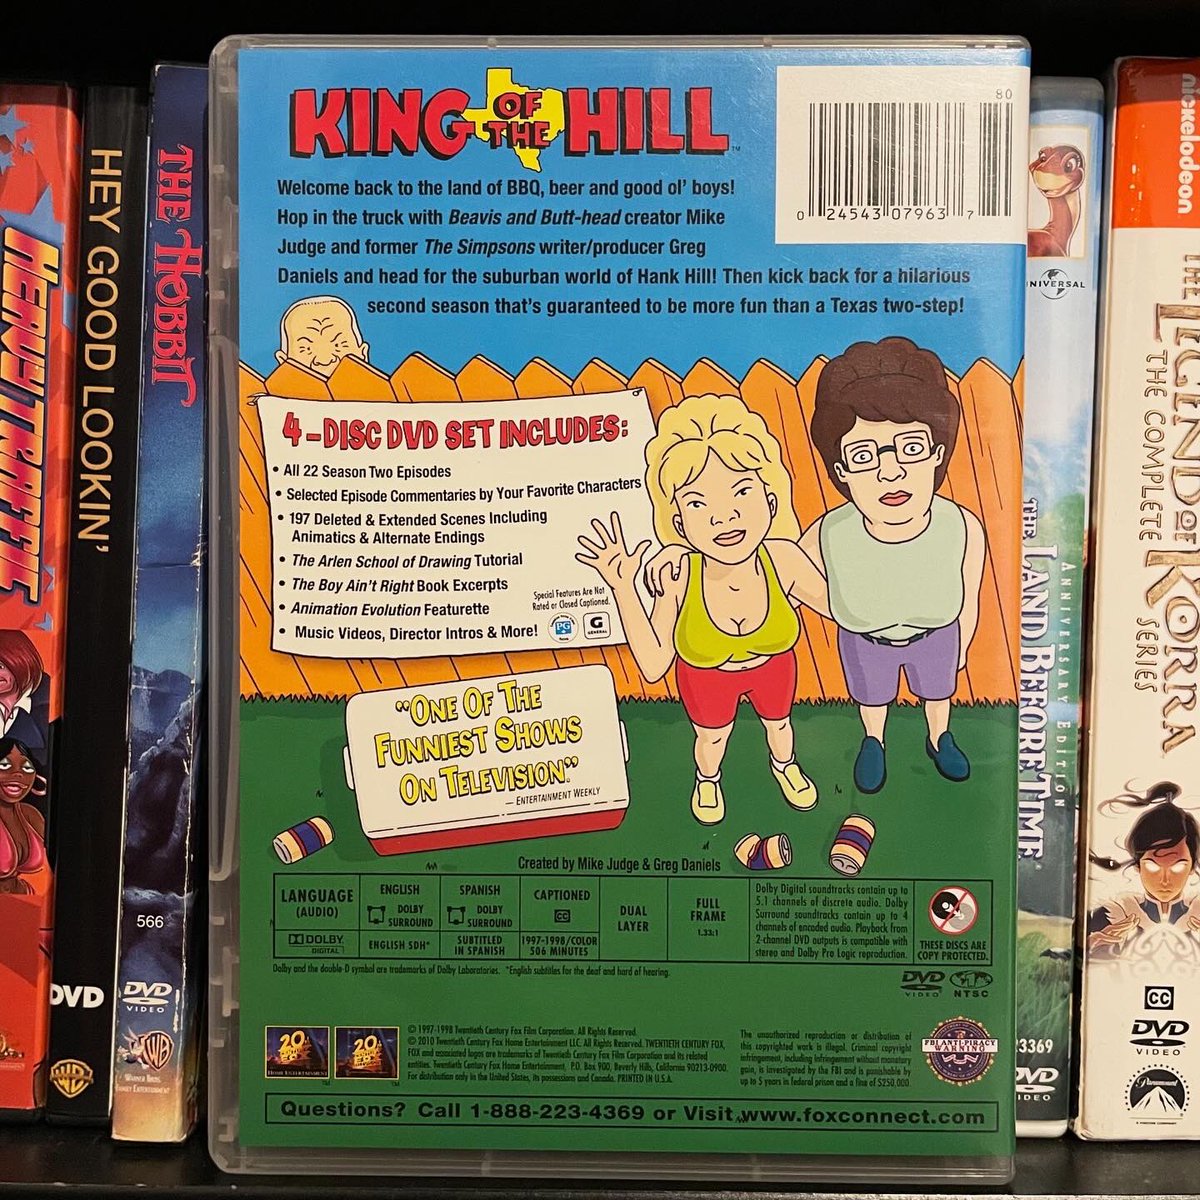 “There’s no yelling in the propane department. Some of these gases are extremely valublilous”
#kingofthehill #animatedseries #season2 #mikejudge #bobbyhill #hankhill #90stv #pamelaadlon #kathynajimy #stephenroot #brittanymurphy #tobyhuss #dvd